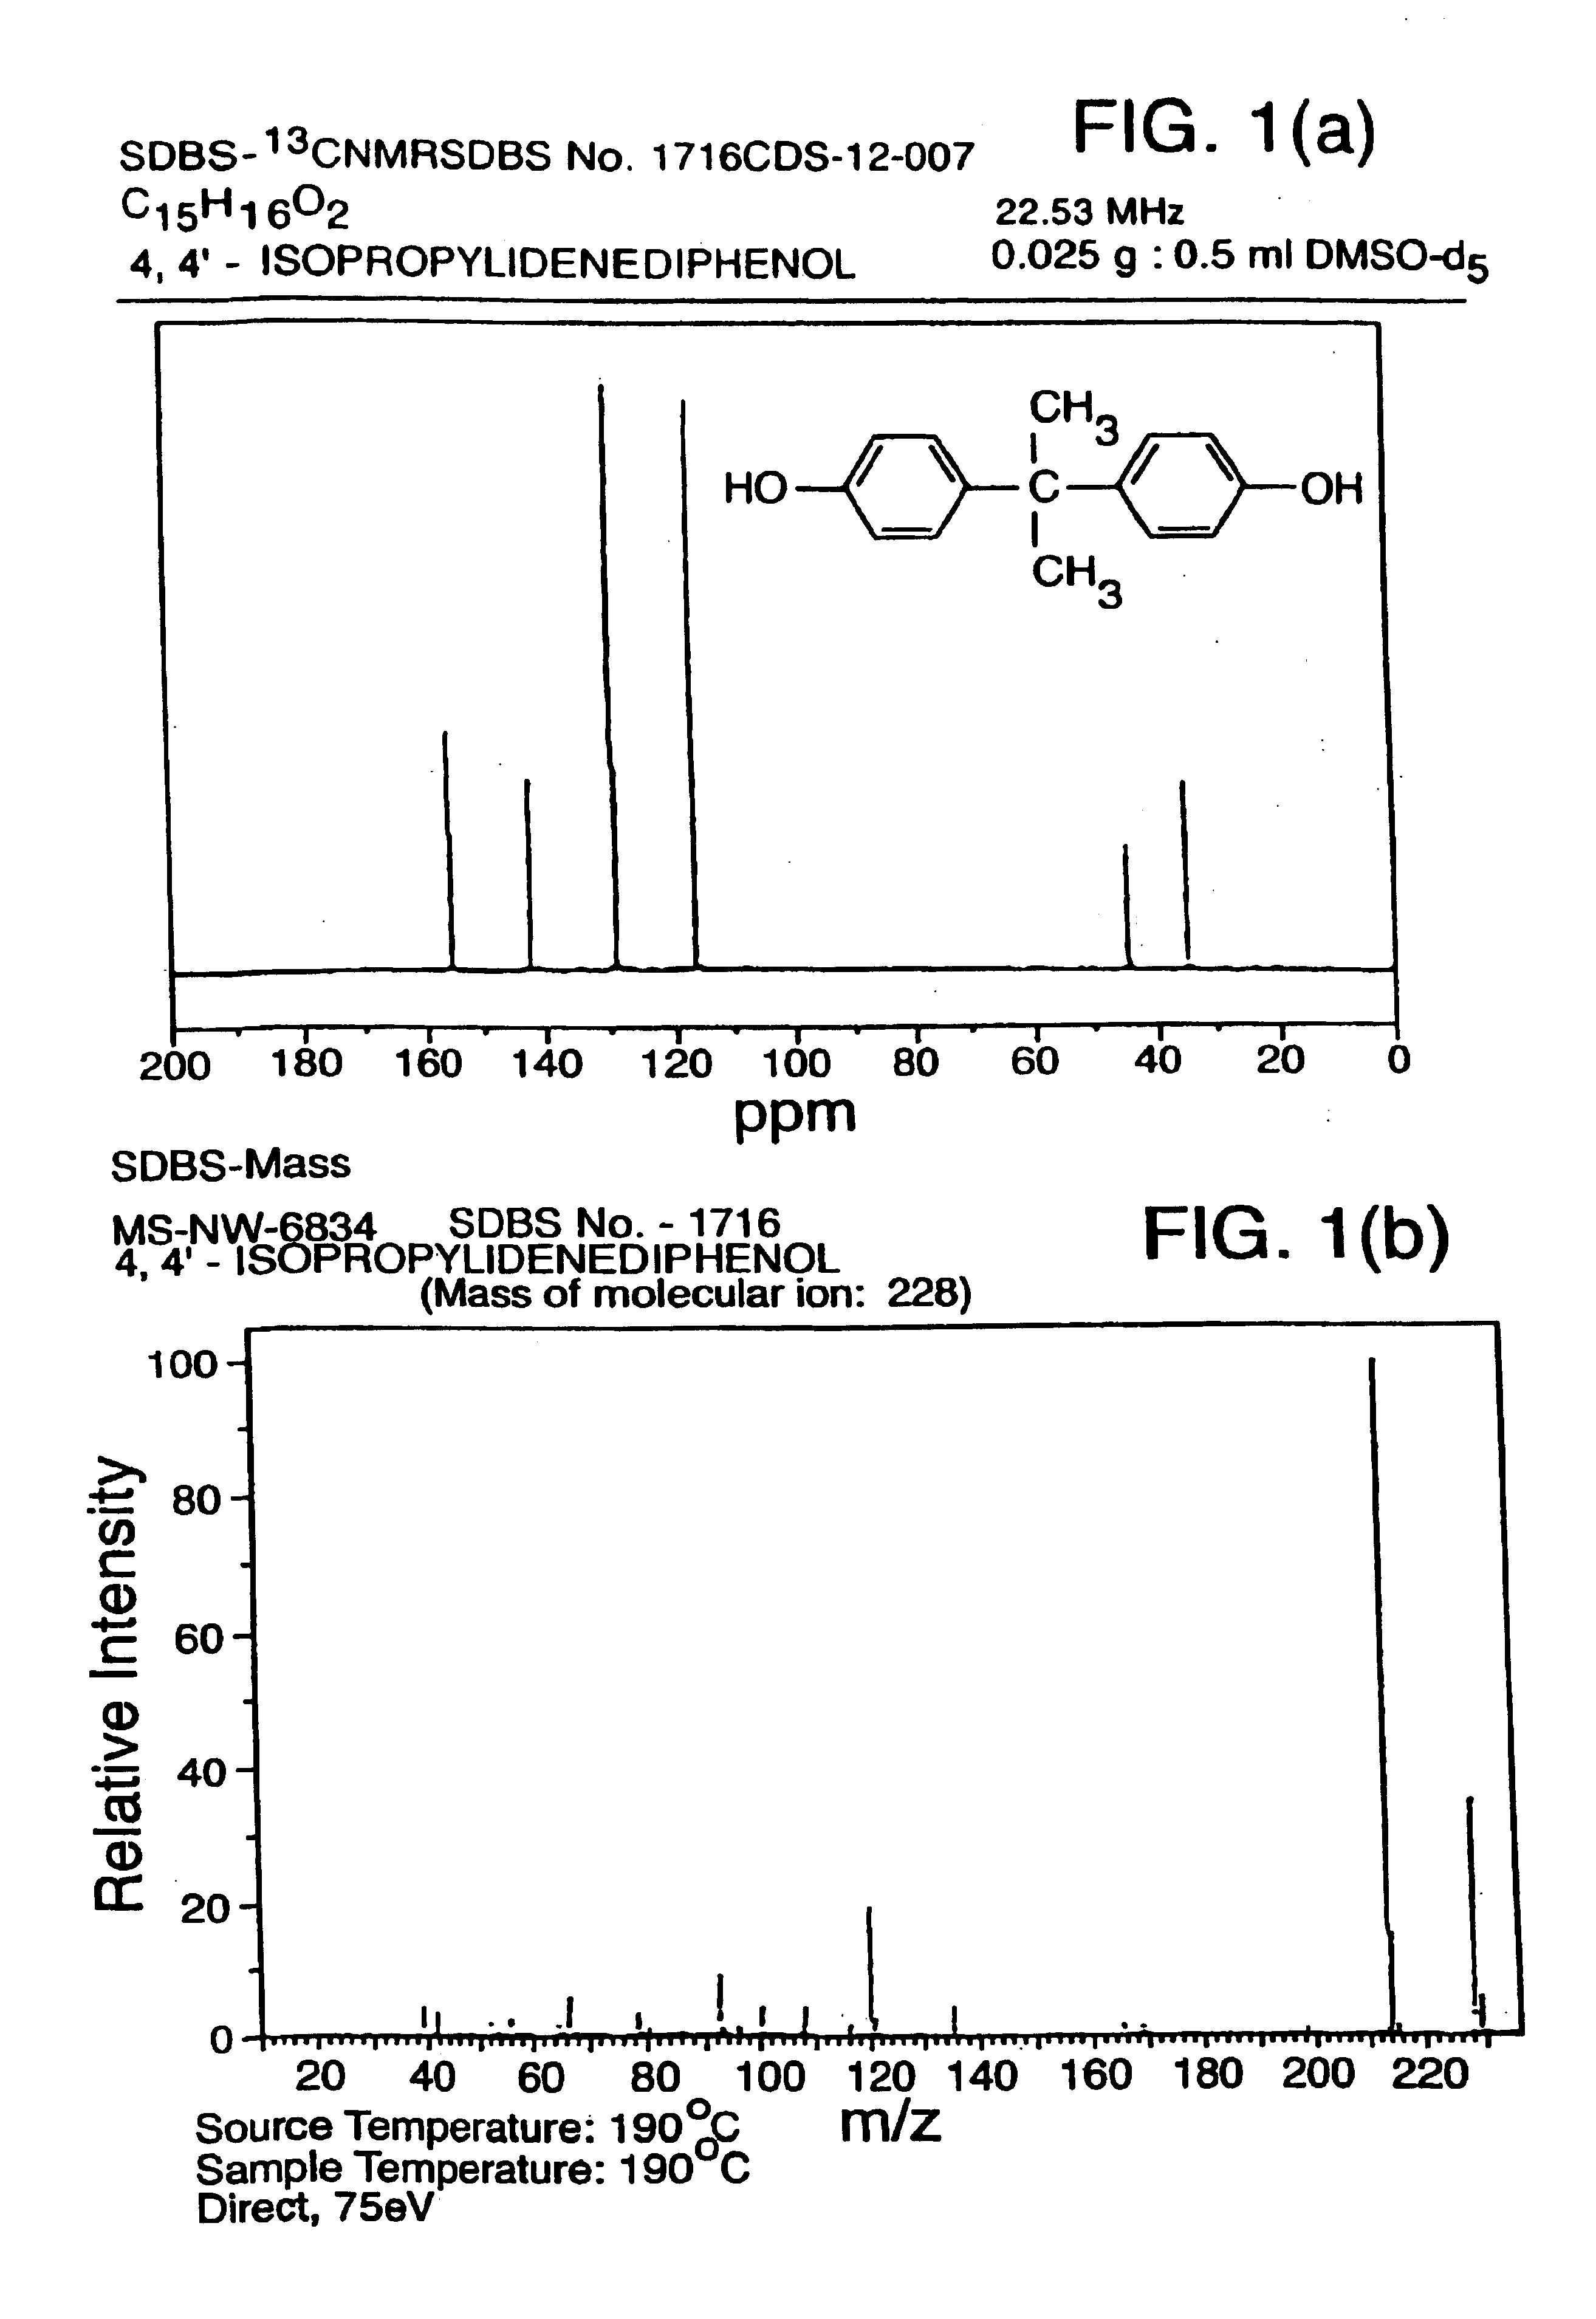 Methods for predicting the biological, chemical, and physical properties of molecules from their spectral properties